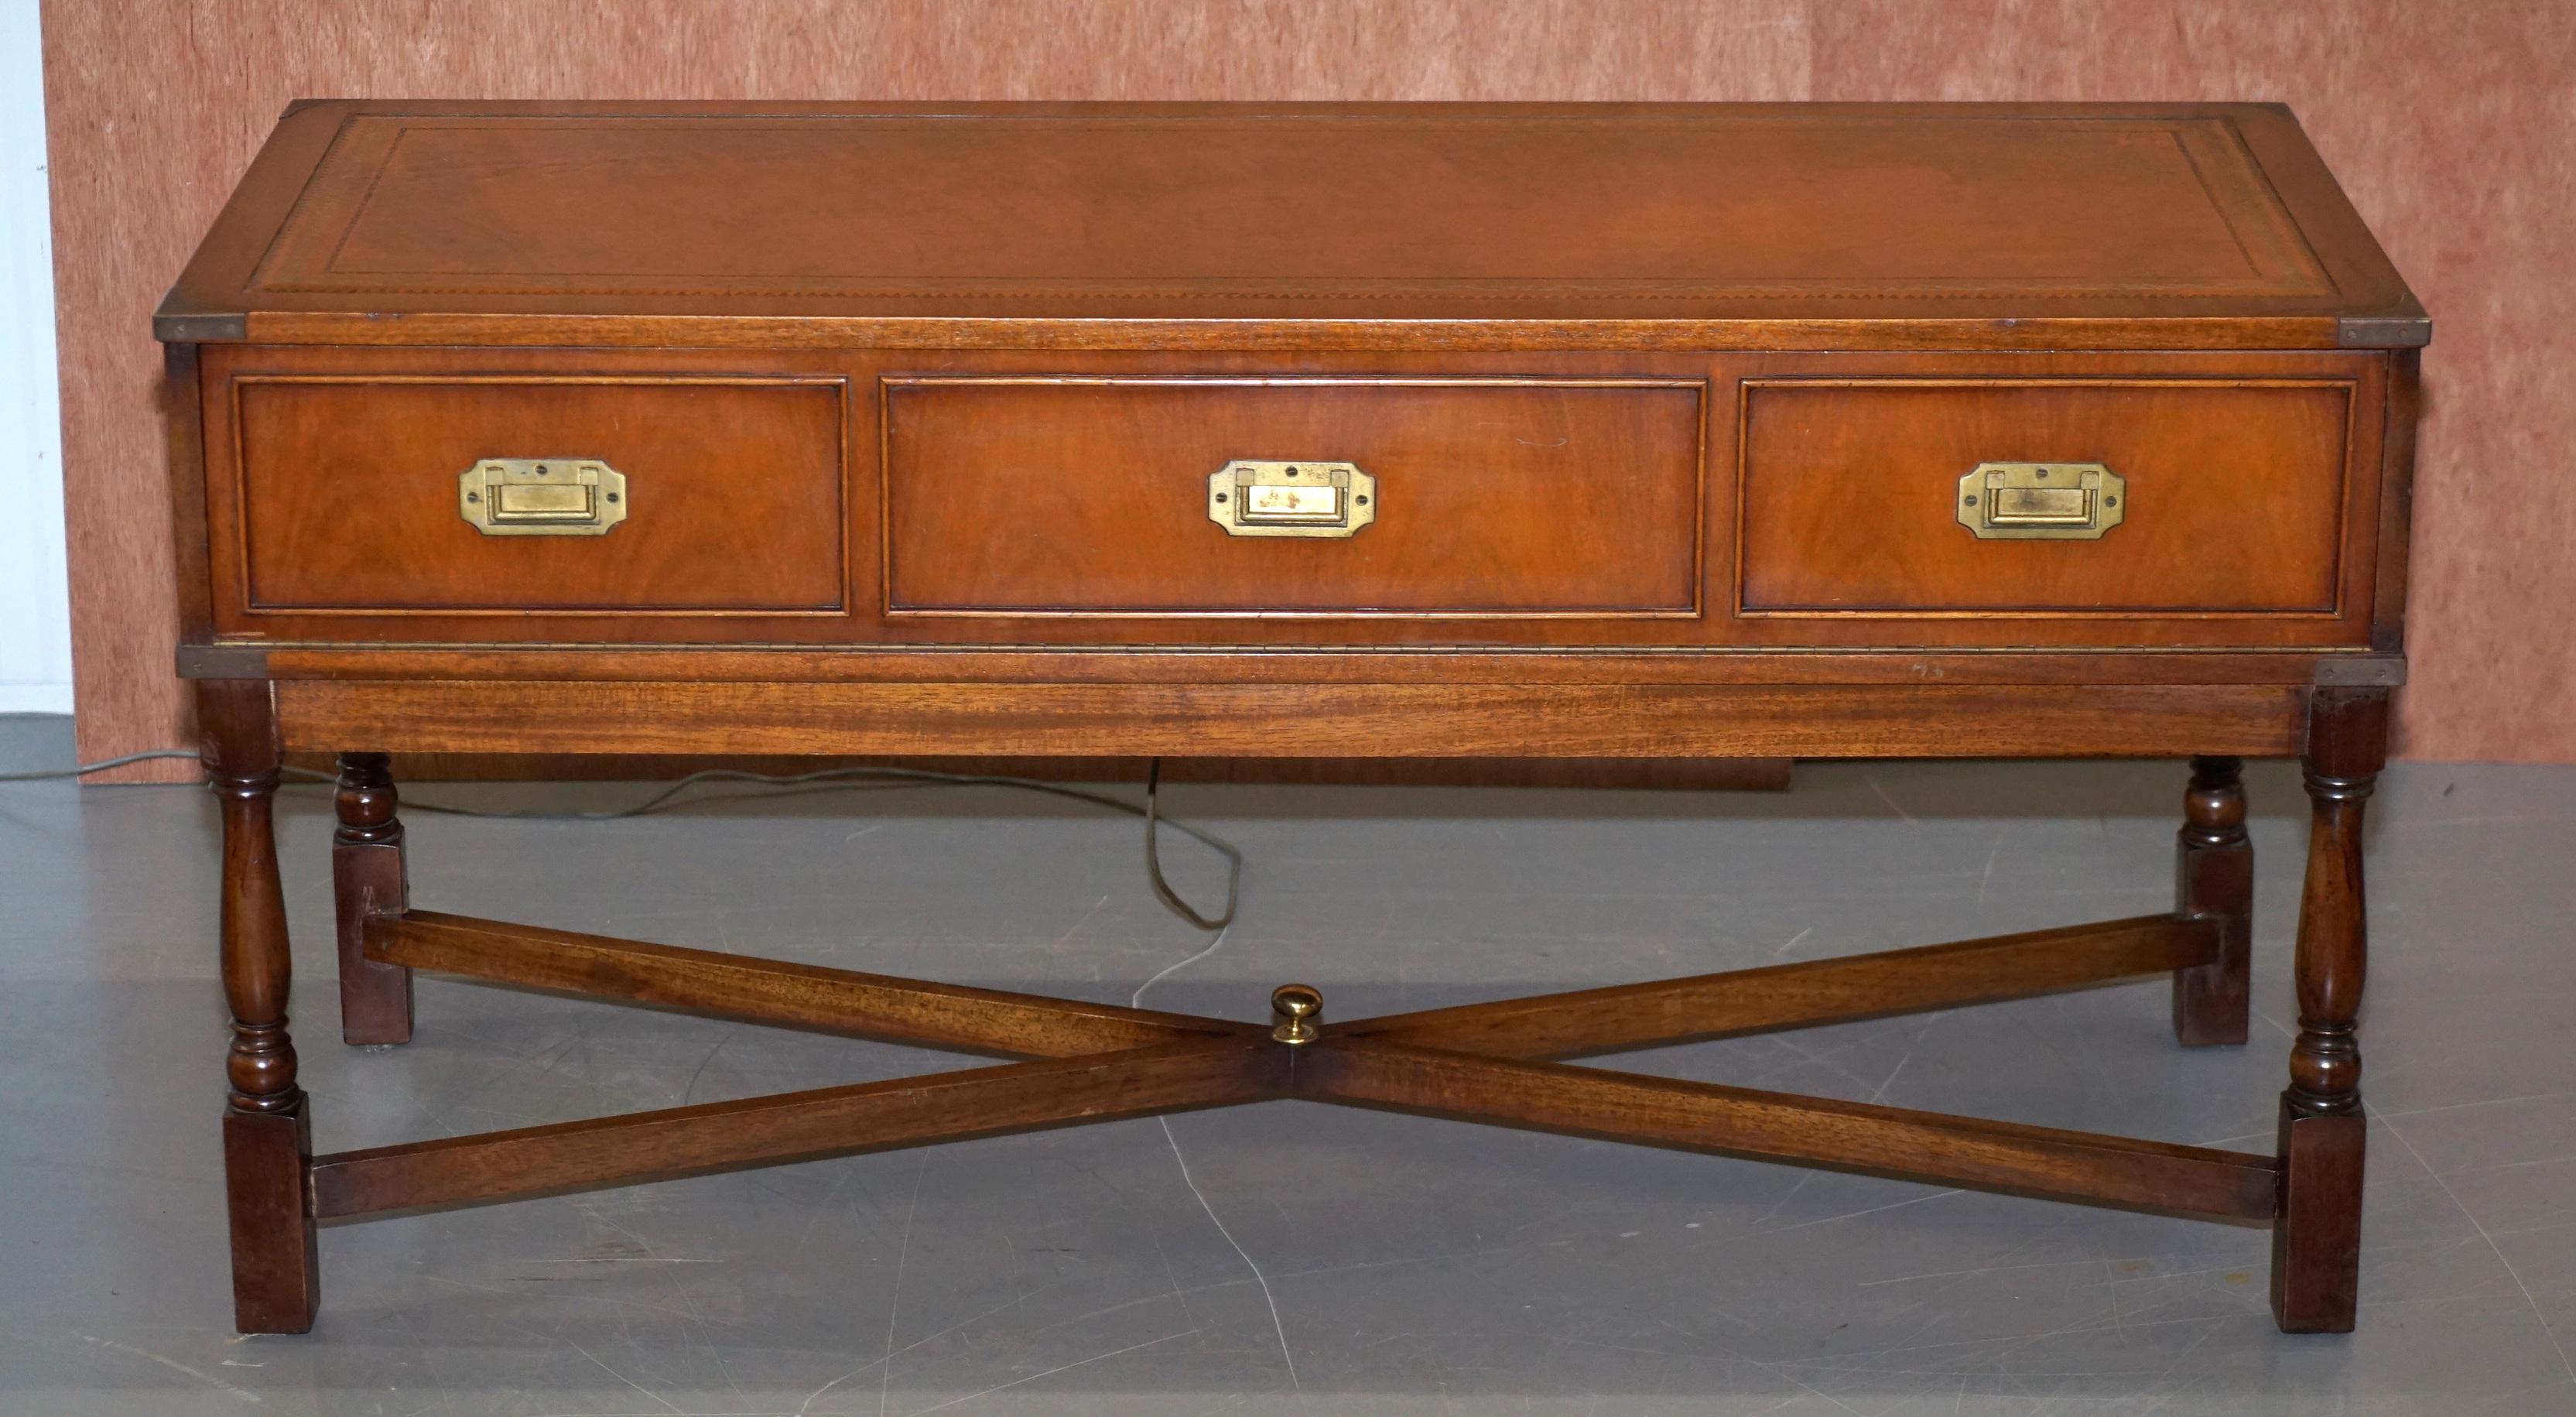 We are delighted to this lovely vintage circa 1970s impulse ST 210 Radiogram Military Campaign brown leather topped console table

What a cool thing, on the outside you have the never out of style military Campaign style console table, it’s the